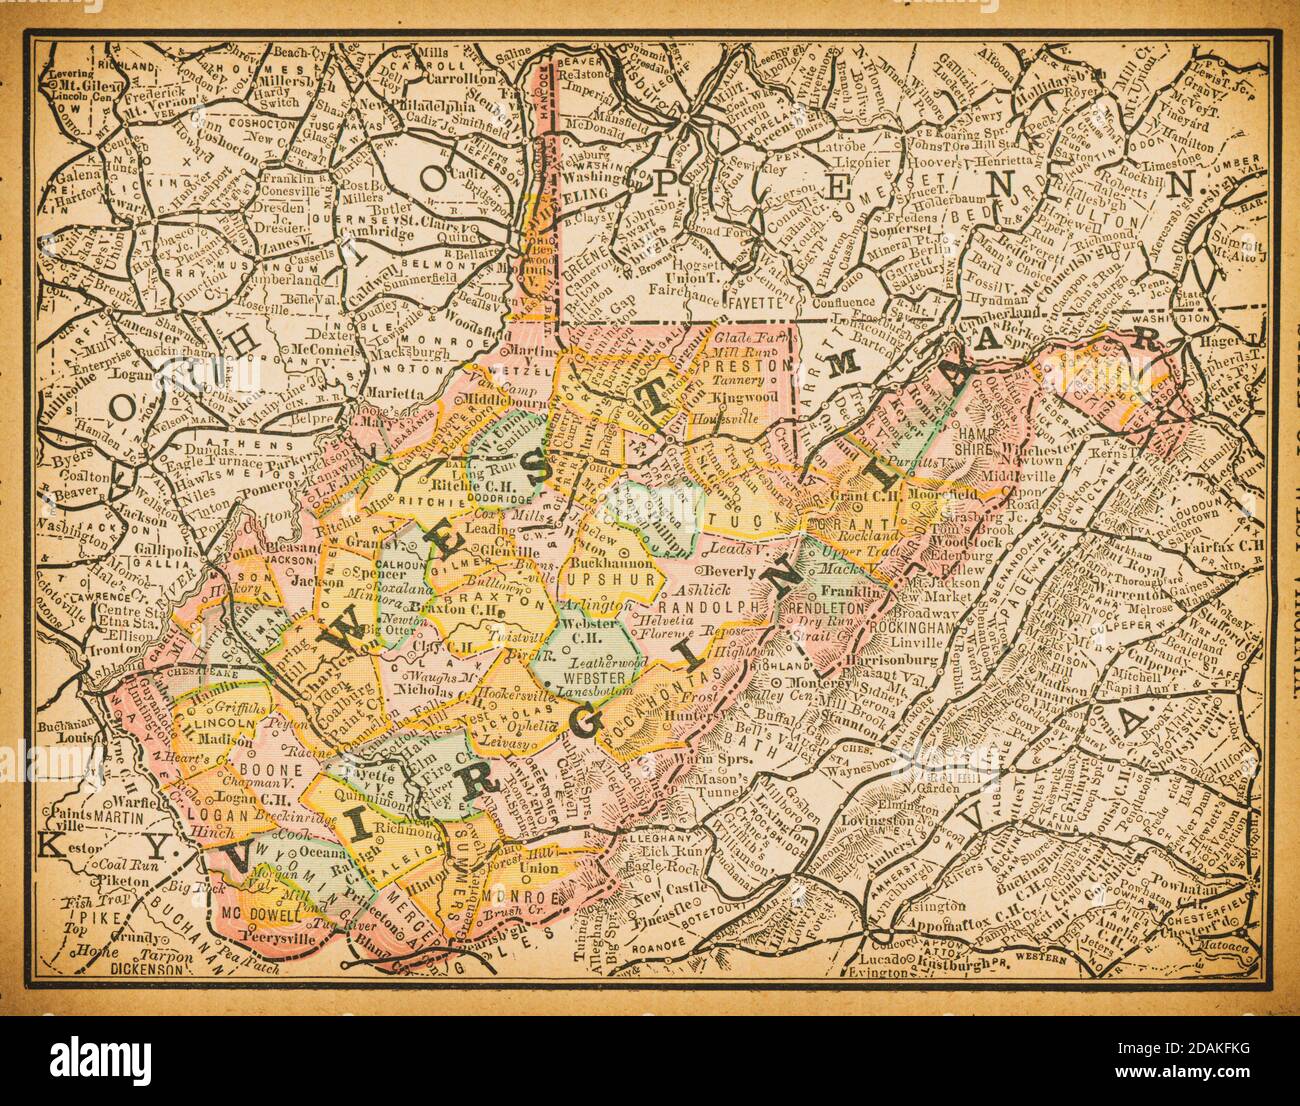 19th century map of West Virginia.Published in New Dollar Atlas of the United States and Dominion of Canada. (Rand McNally & Co's, Chicago, 1884). Stock Photo